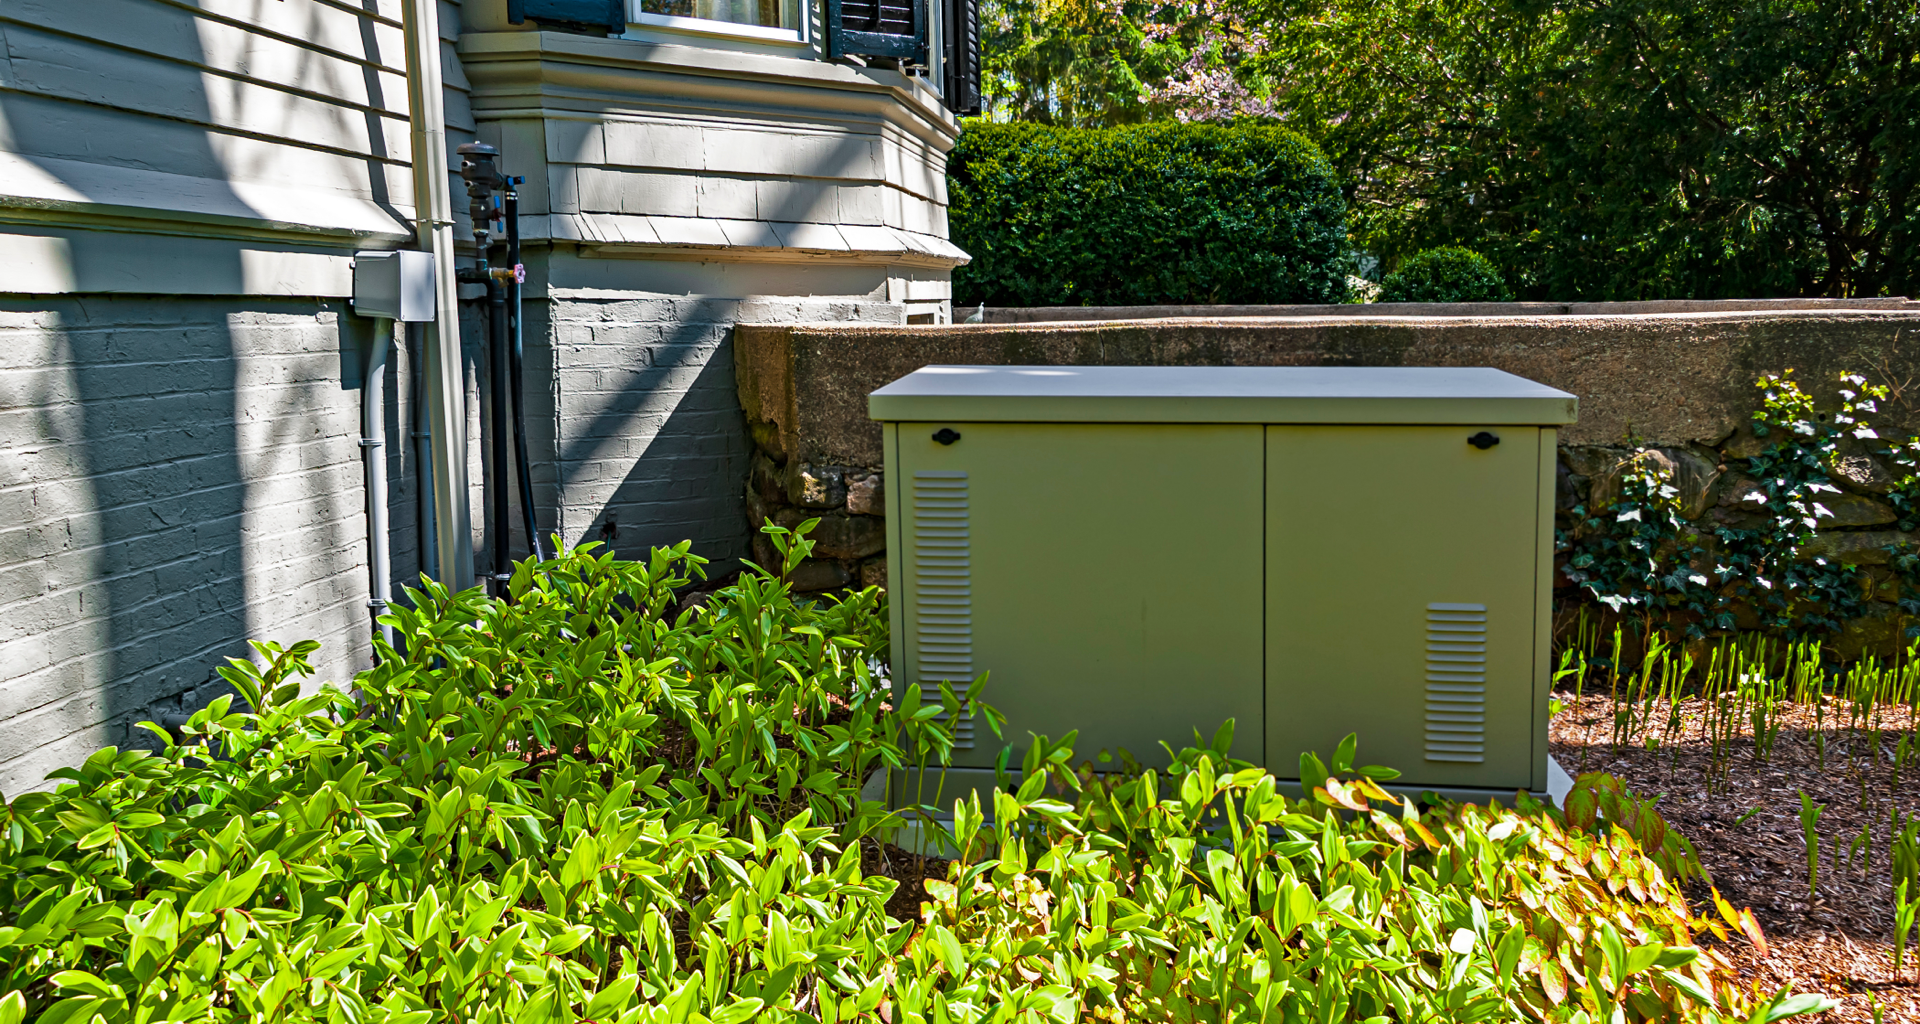 Residential Emergency Generators vs Electric Battery Storage for Your Home: Evaluating the Options